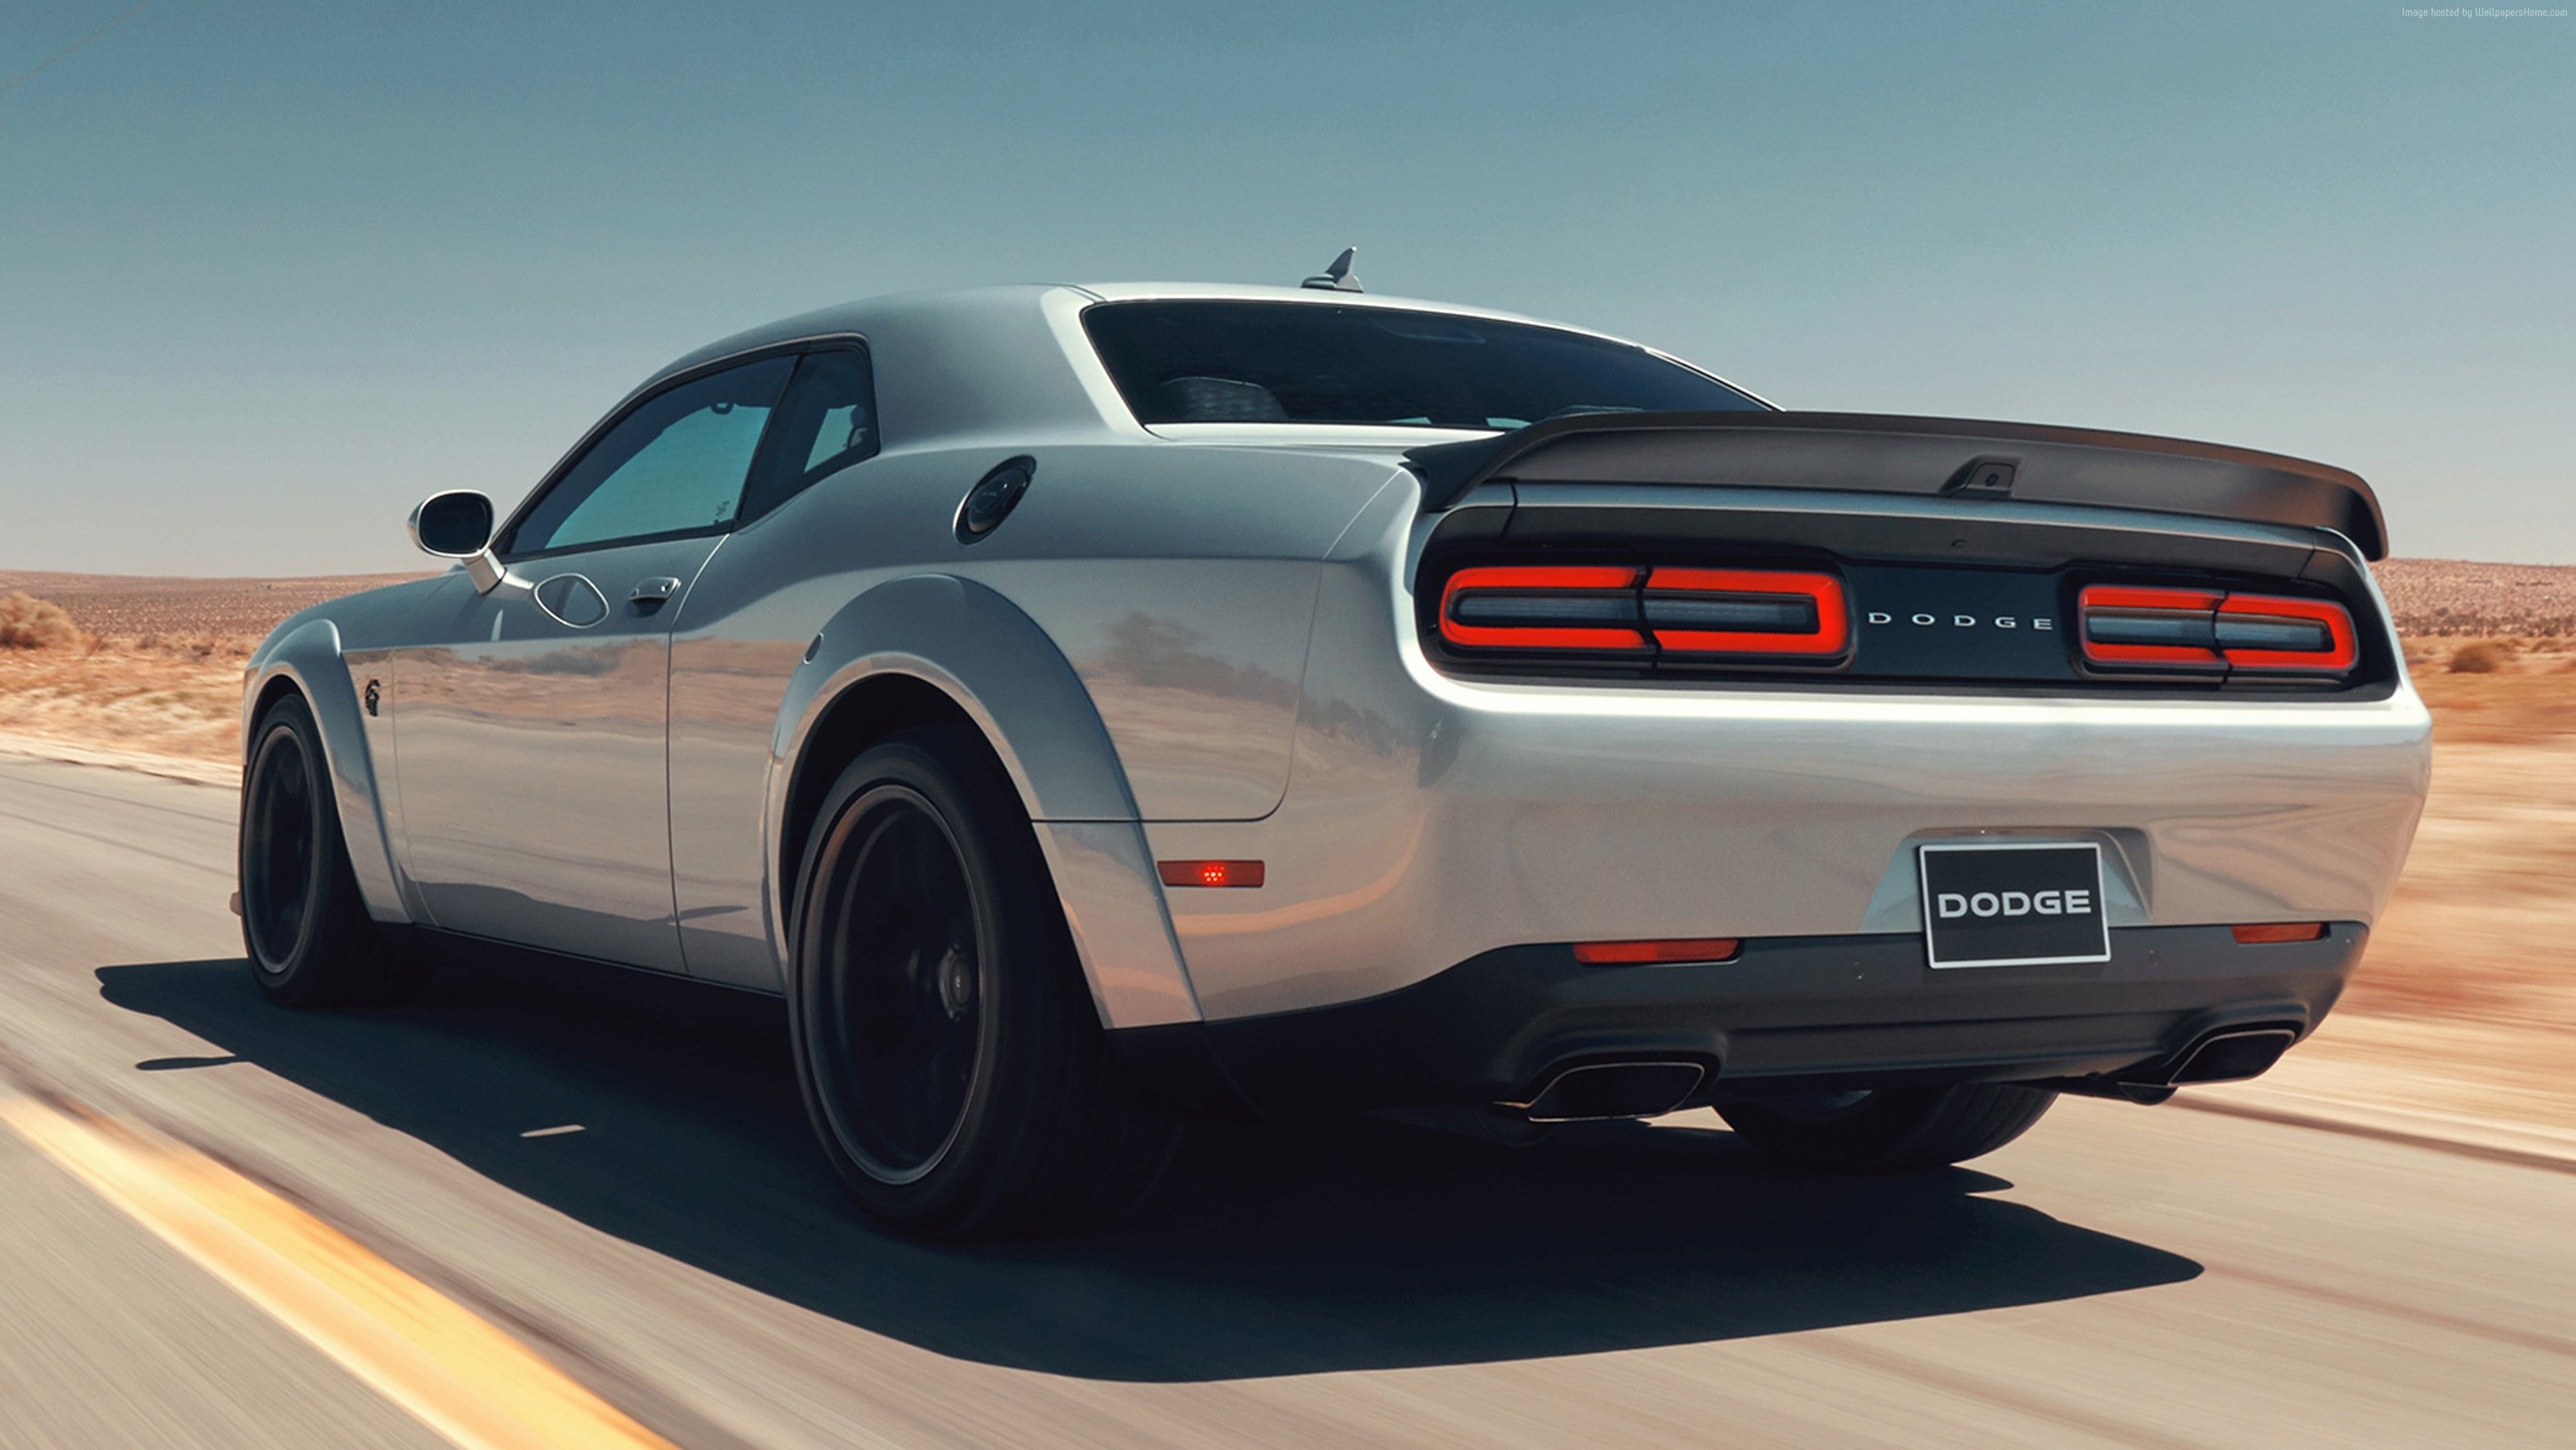 Dodge Challenger srt hellcat, Unmatched power and speed, Iconic American muscle, Striking design, 3560x2000 HD Desktop